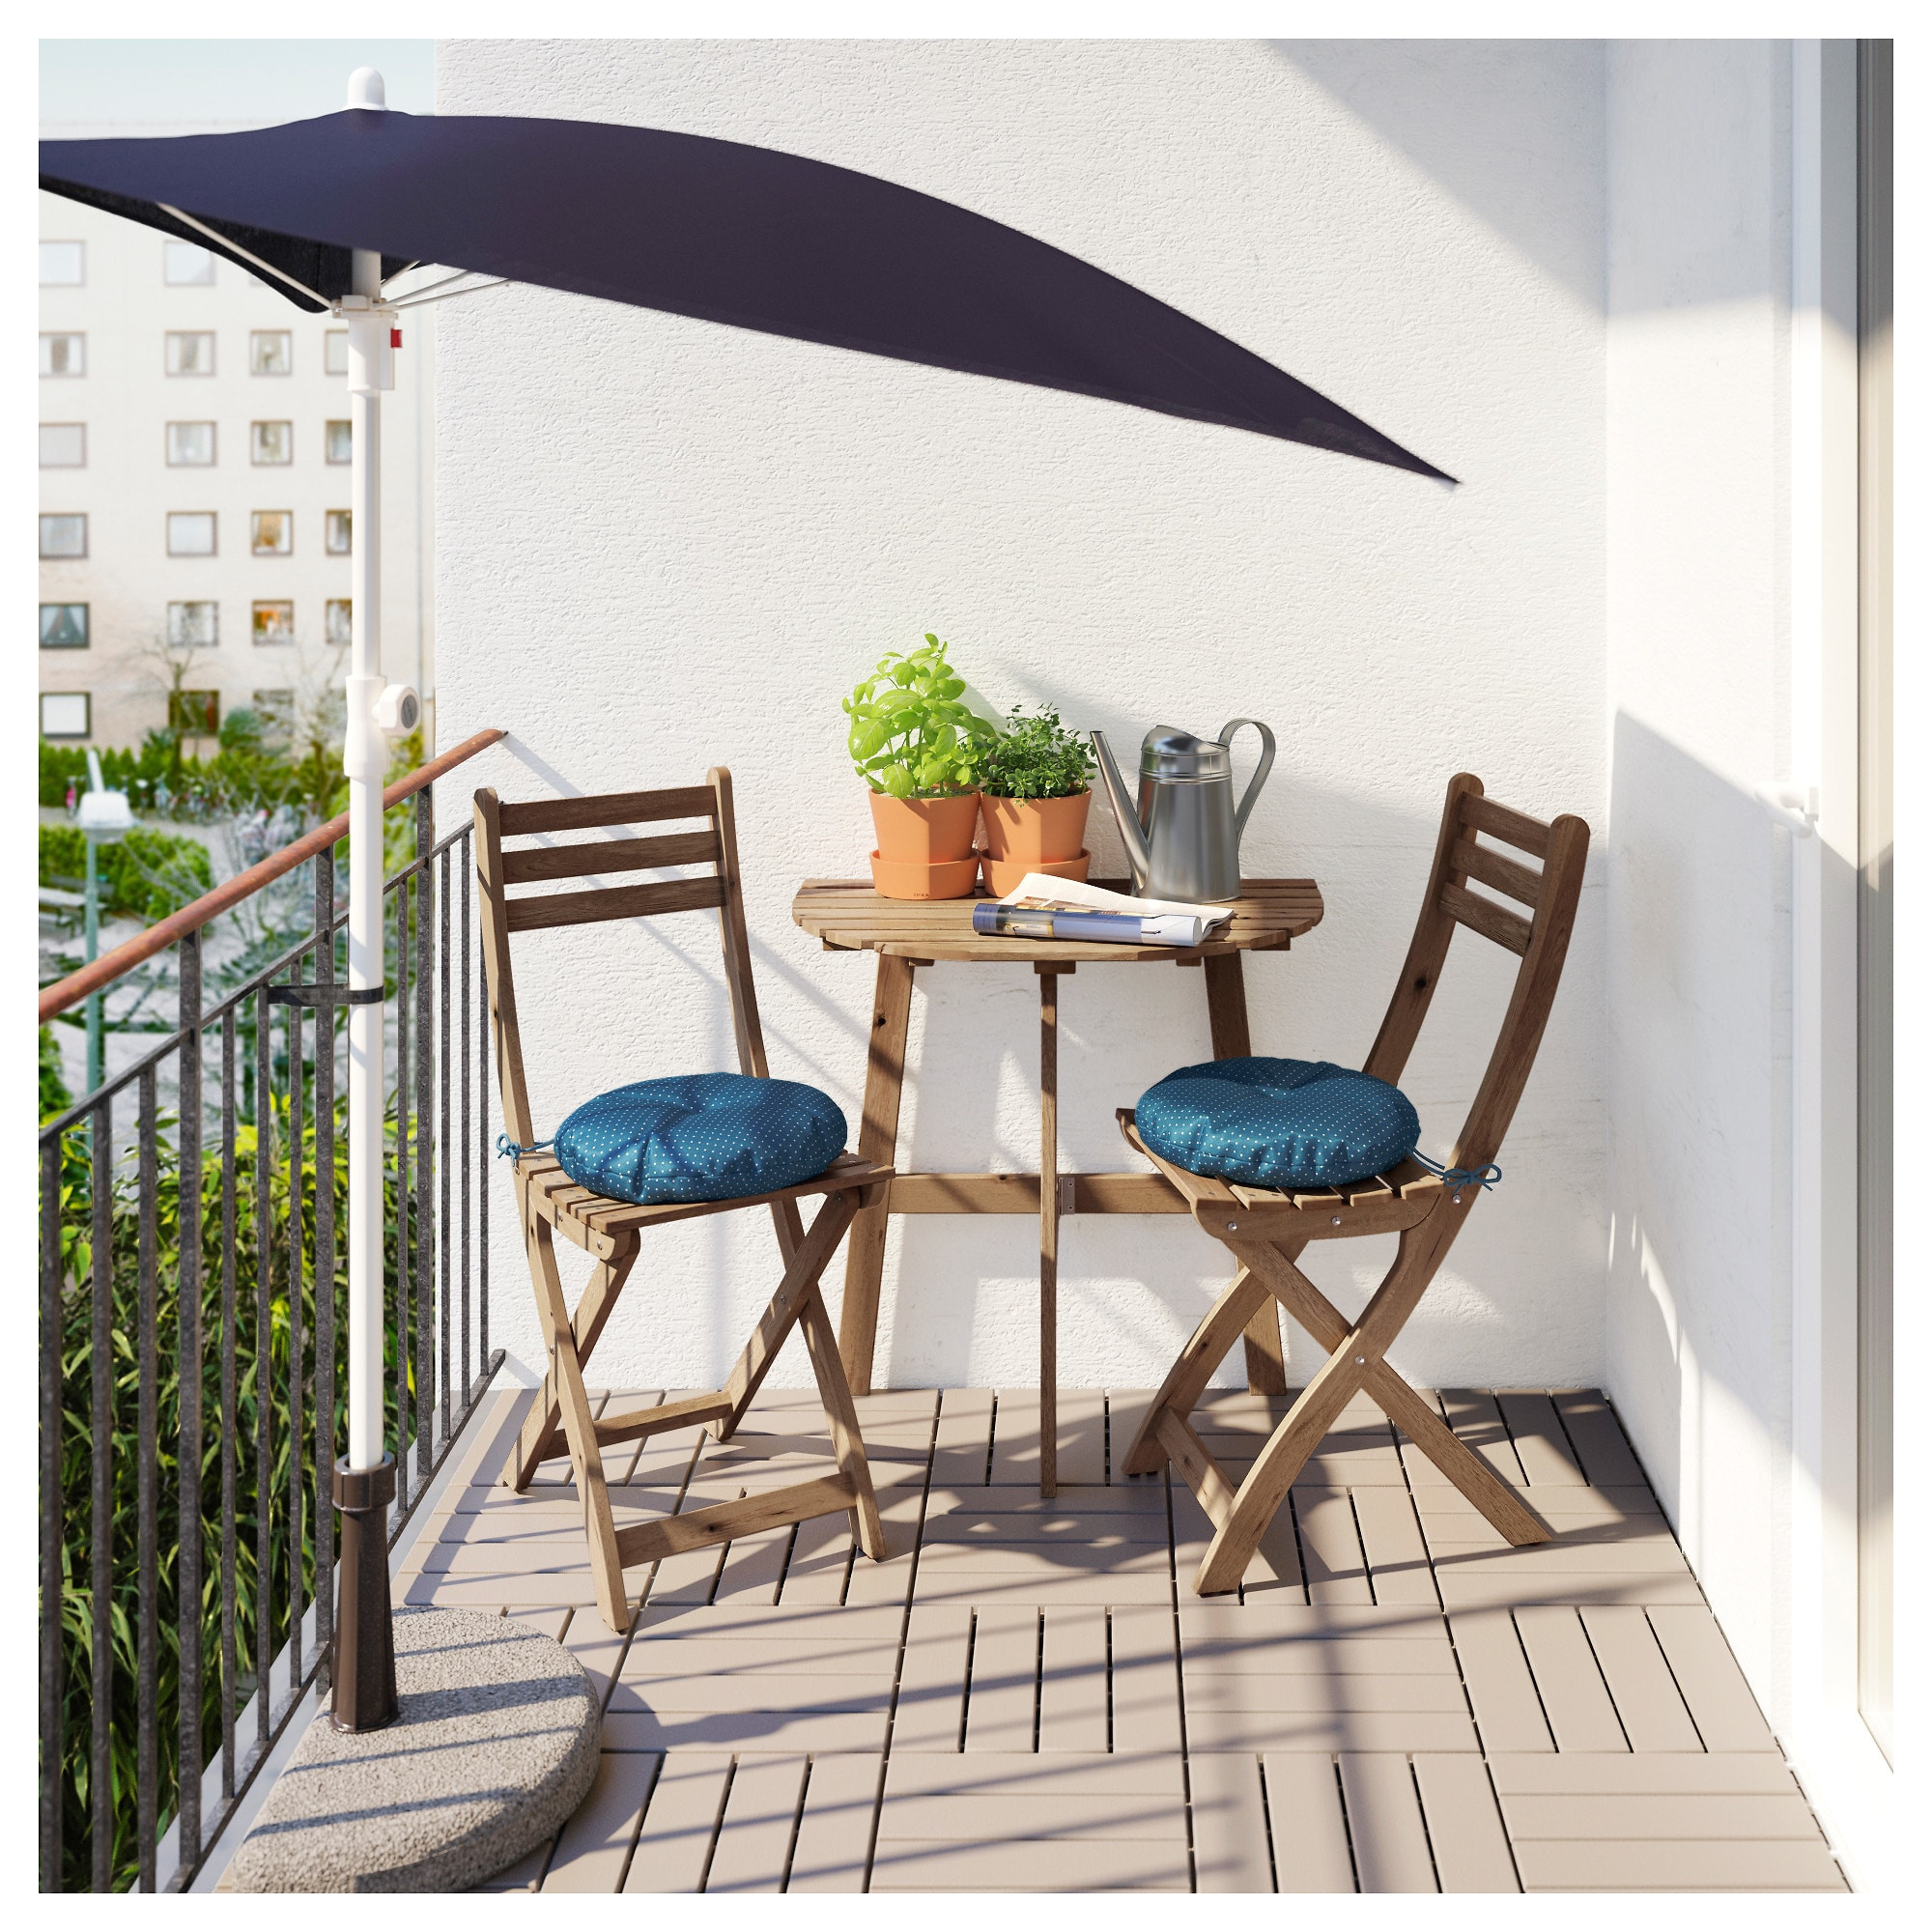 charming ikea tampa home furnishings tampa fl or askholmen wall table 2 folding chairs outdoor askholmen